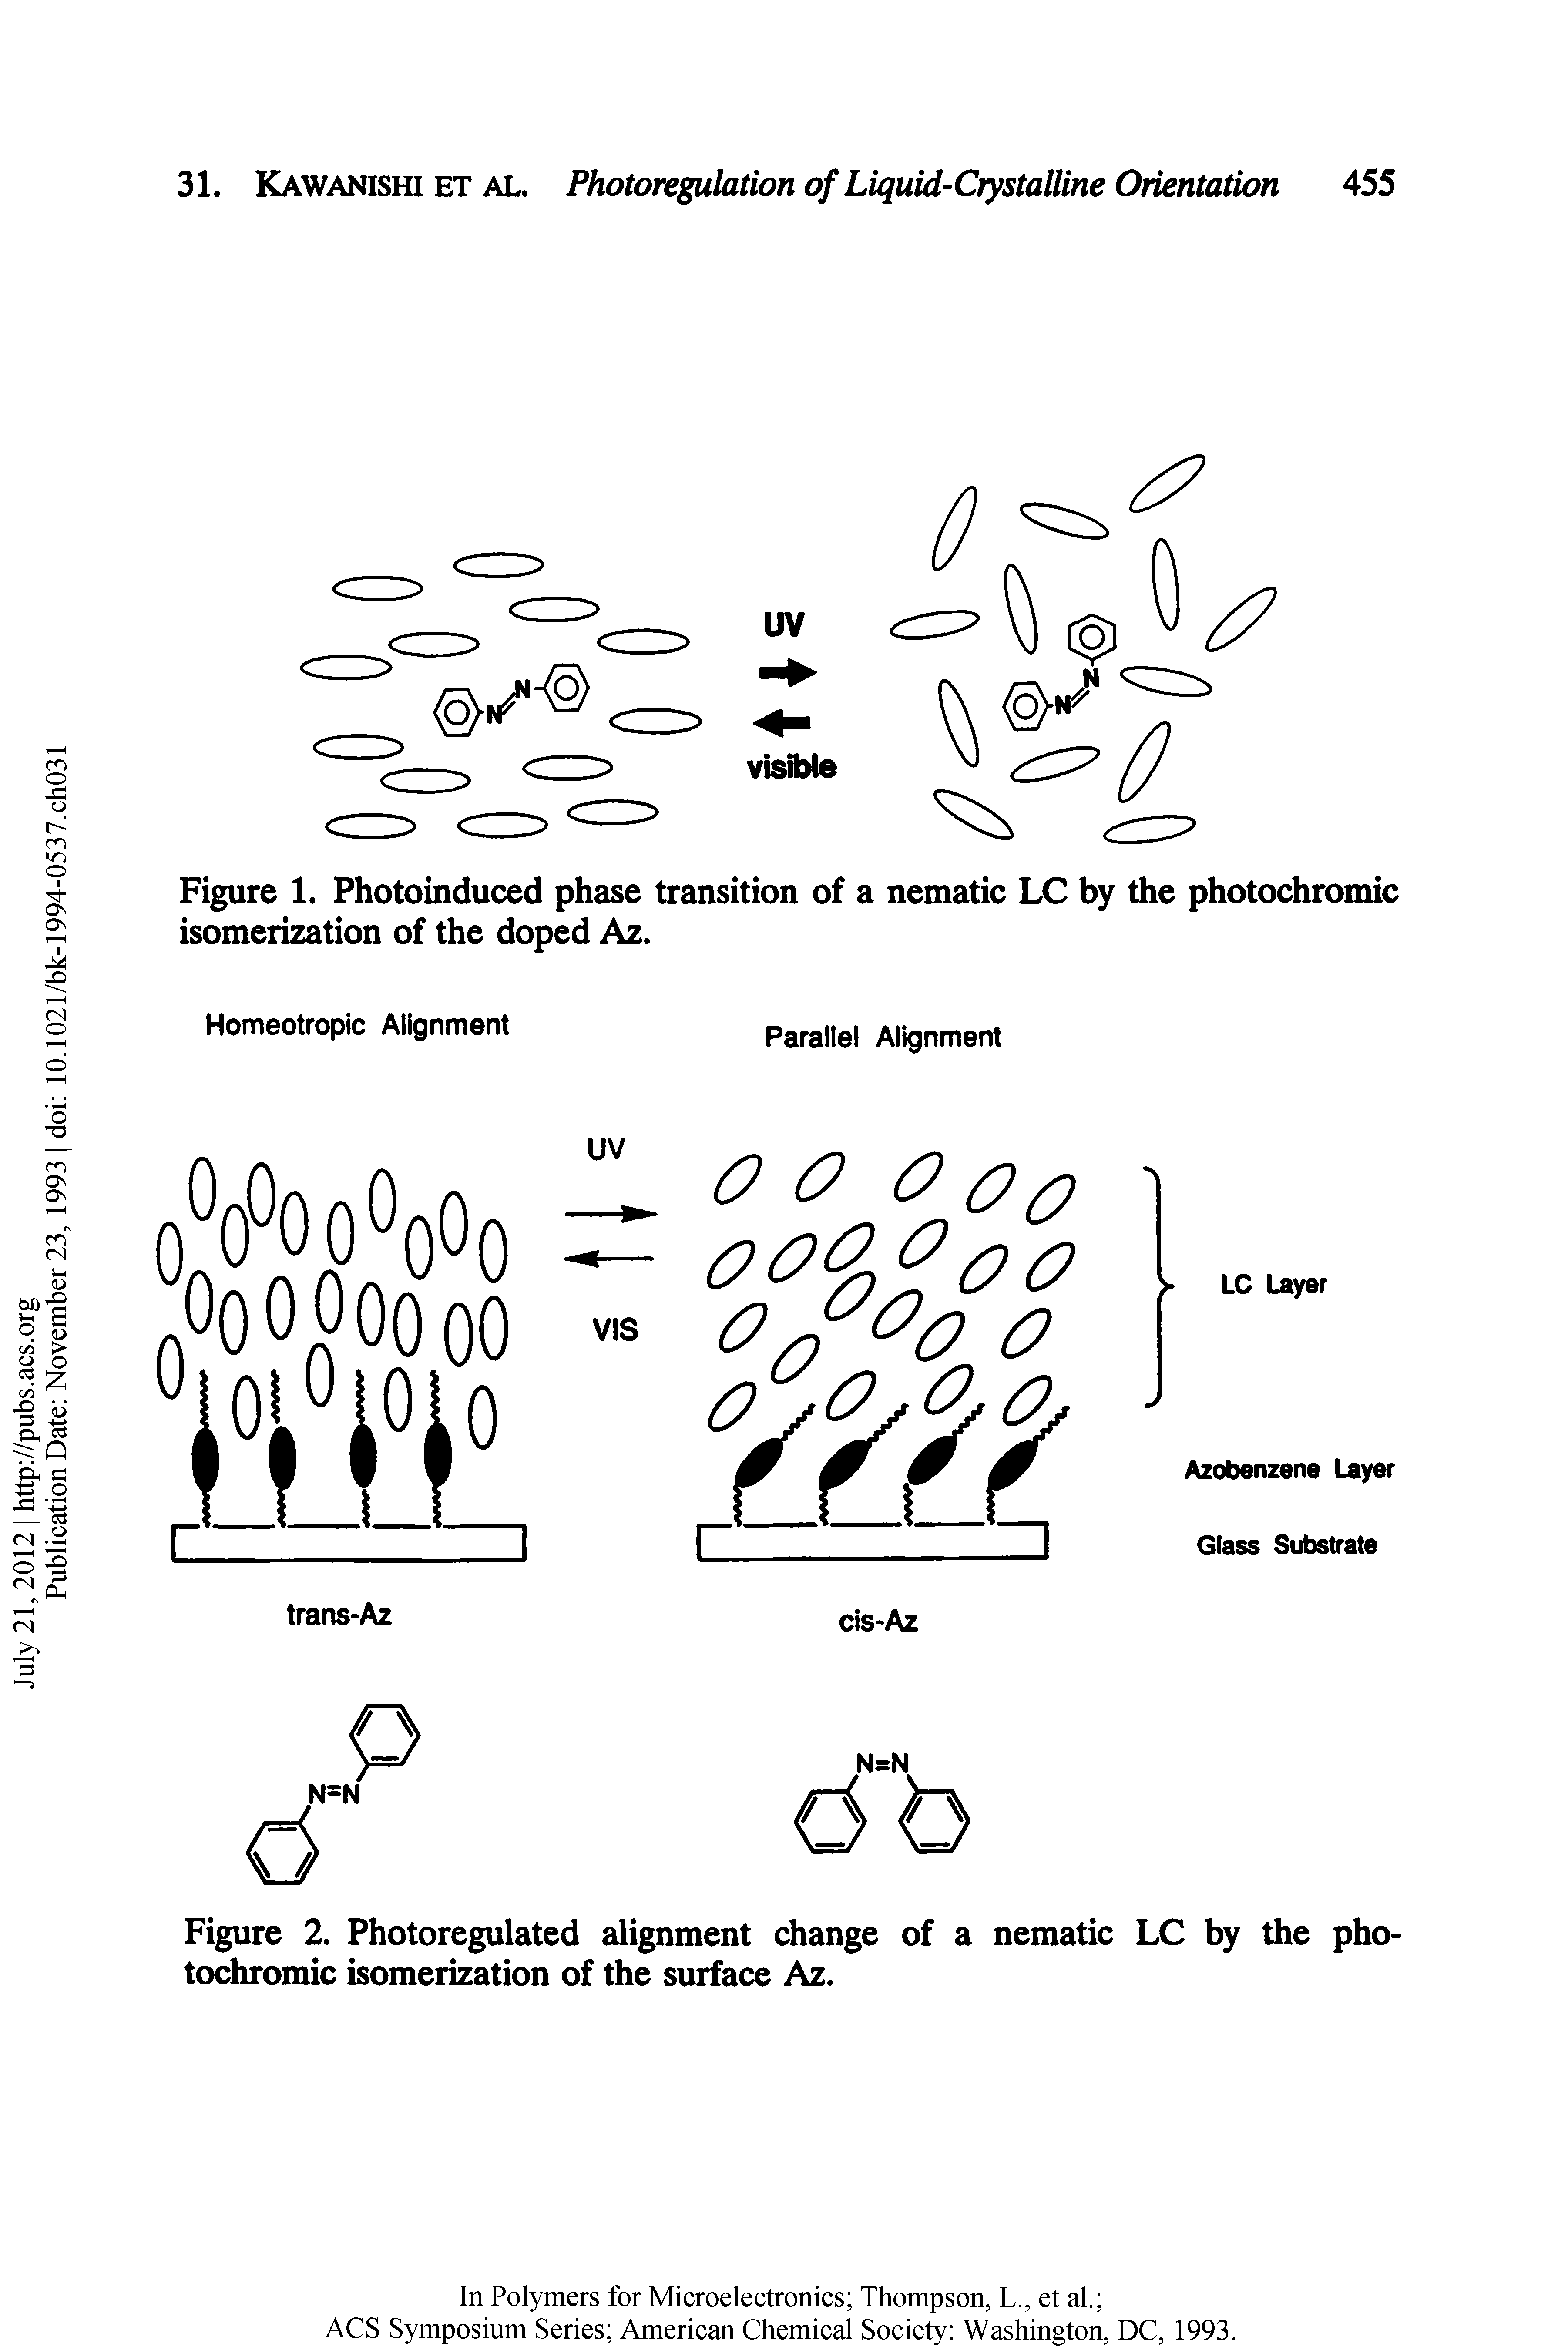 Figure 1. Photoinduced phase transition of a nematic LC by the photochromic isomerization of the doped Az.